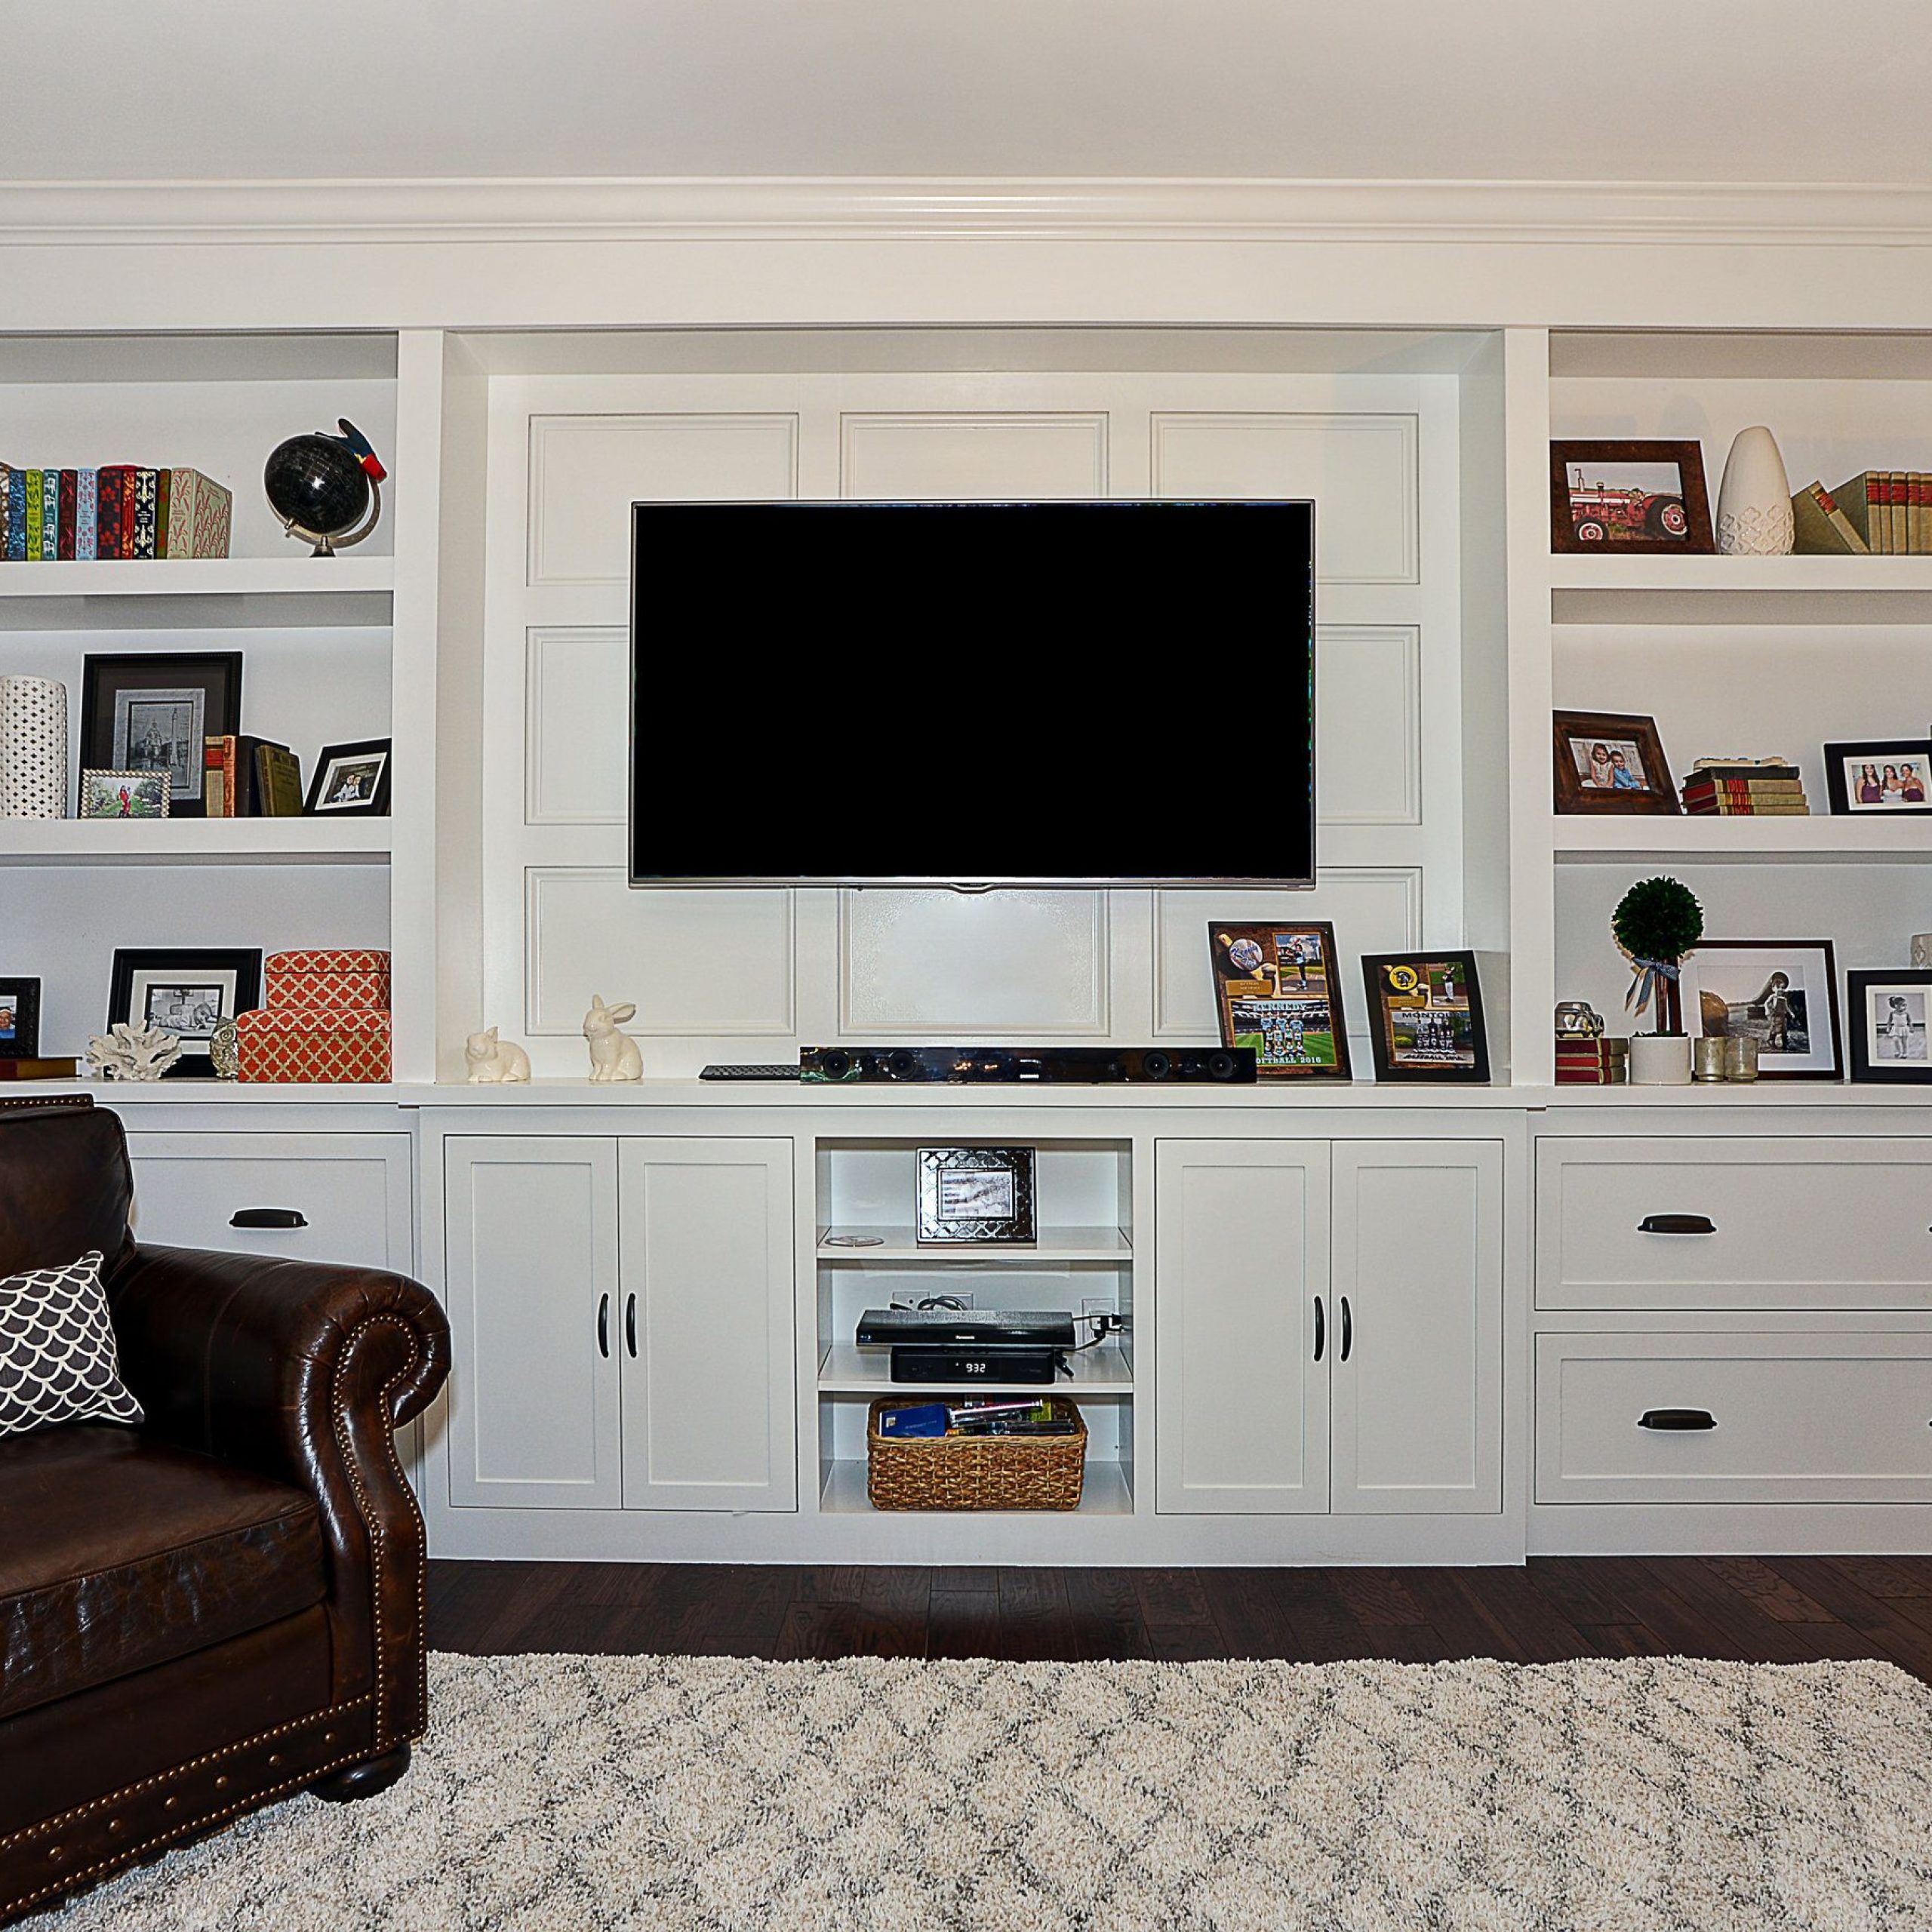 Organizing Your Living Room With An Entertainment Center With Storage Intended For Entertainment Center With Storage Cabinet (View 5 of 20)